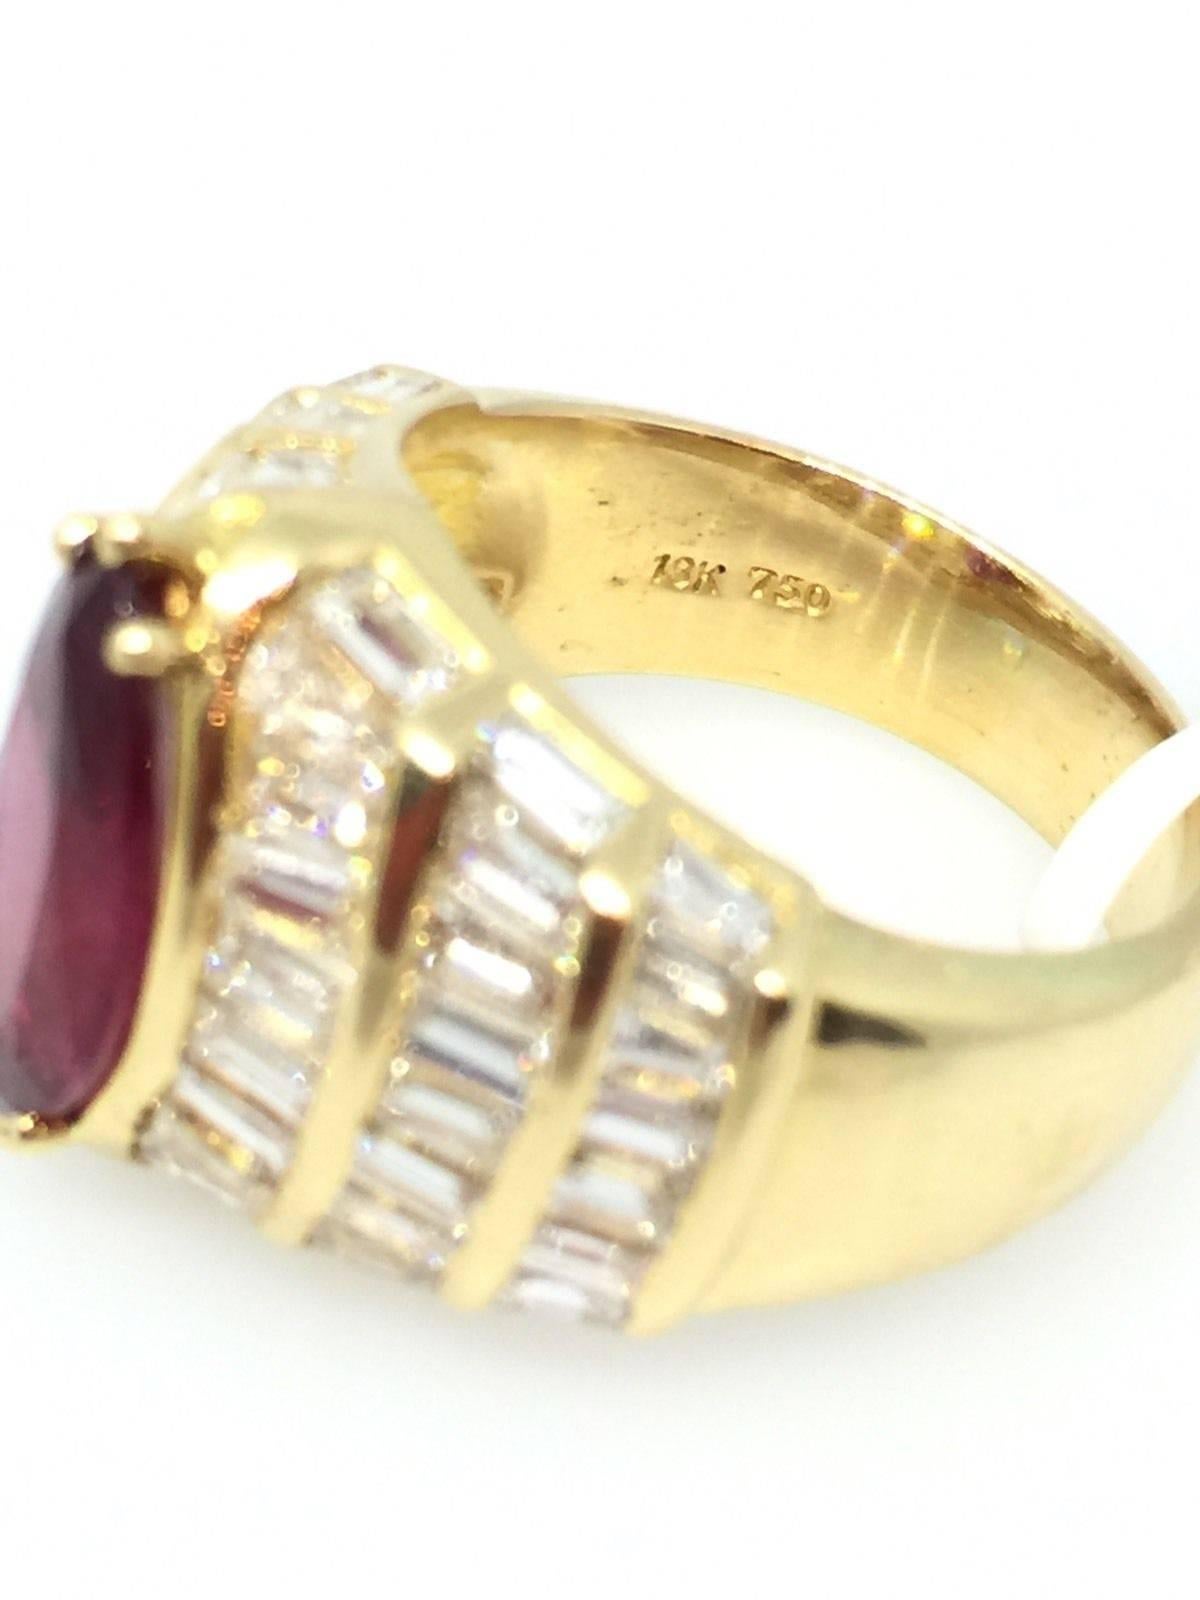 Ruby diamond ring features 3.72 ct Marquise shaped Ruby in the center
GIA Certified, surrounded by 54 Baguettes cut diamonds totaling 3.00 carats. Diamond quality is est. I-J color and VS2-SI clarity. Ring is 15.5 mm wide across the top and